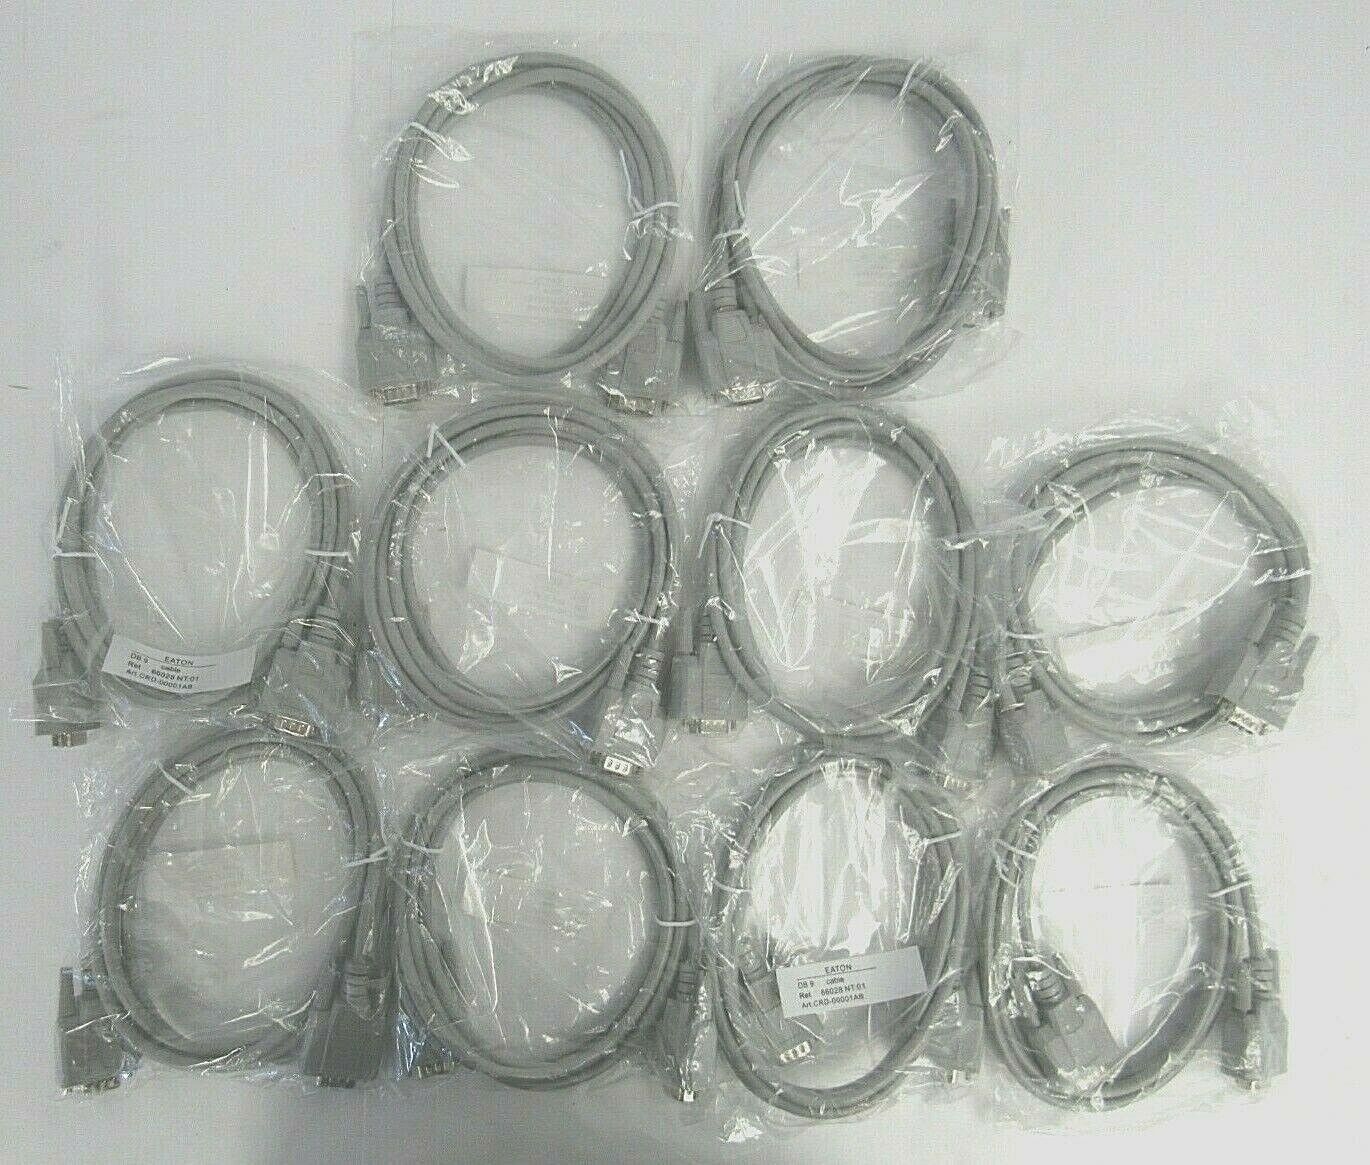 EATON (LOT of 10) DB9 Cable 6 Feet Male to Male 9-Pin 300V 24AWG RS232 27-5 - $43.65